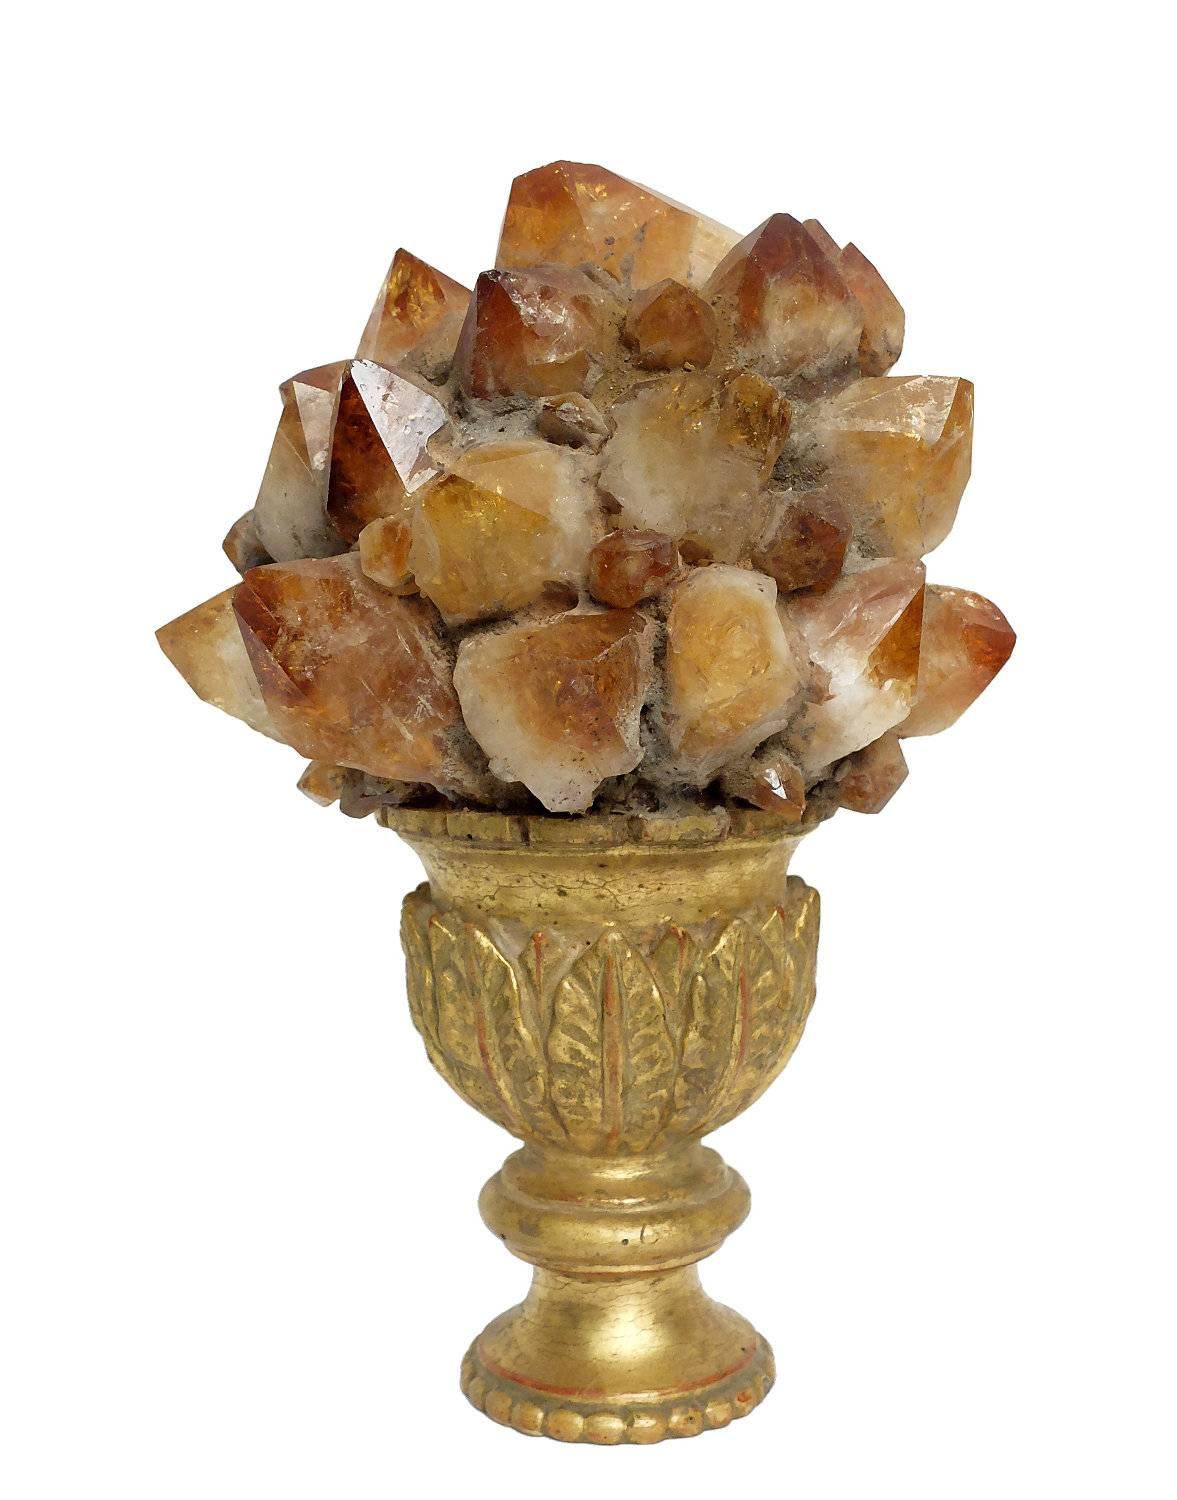 A Naturalia mineral specimen a pair of citrine crystals druzes, mounted over gold-plated wooden bases, in the shape of a vases.